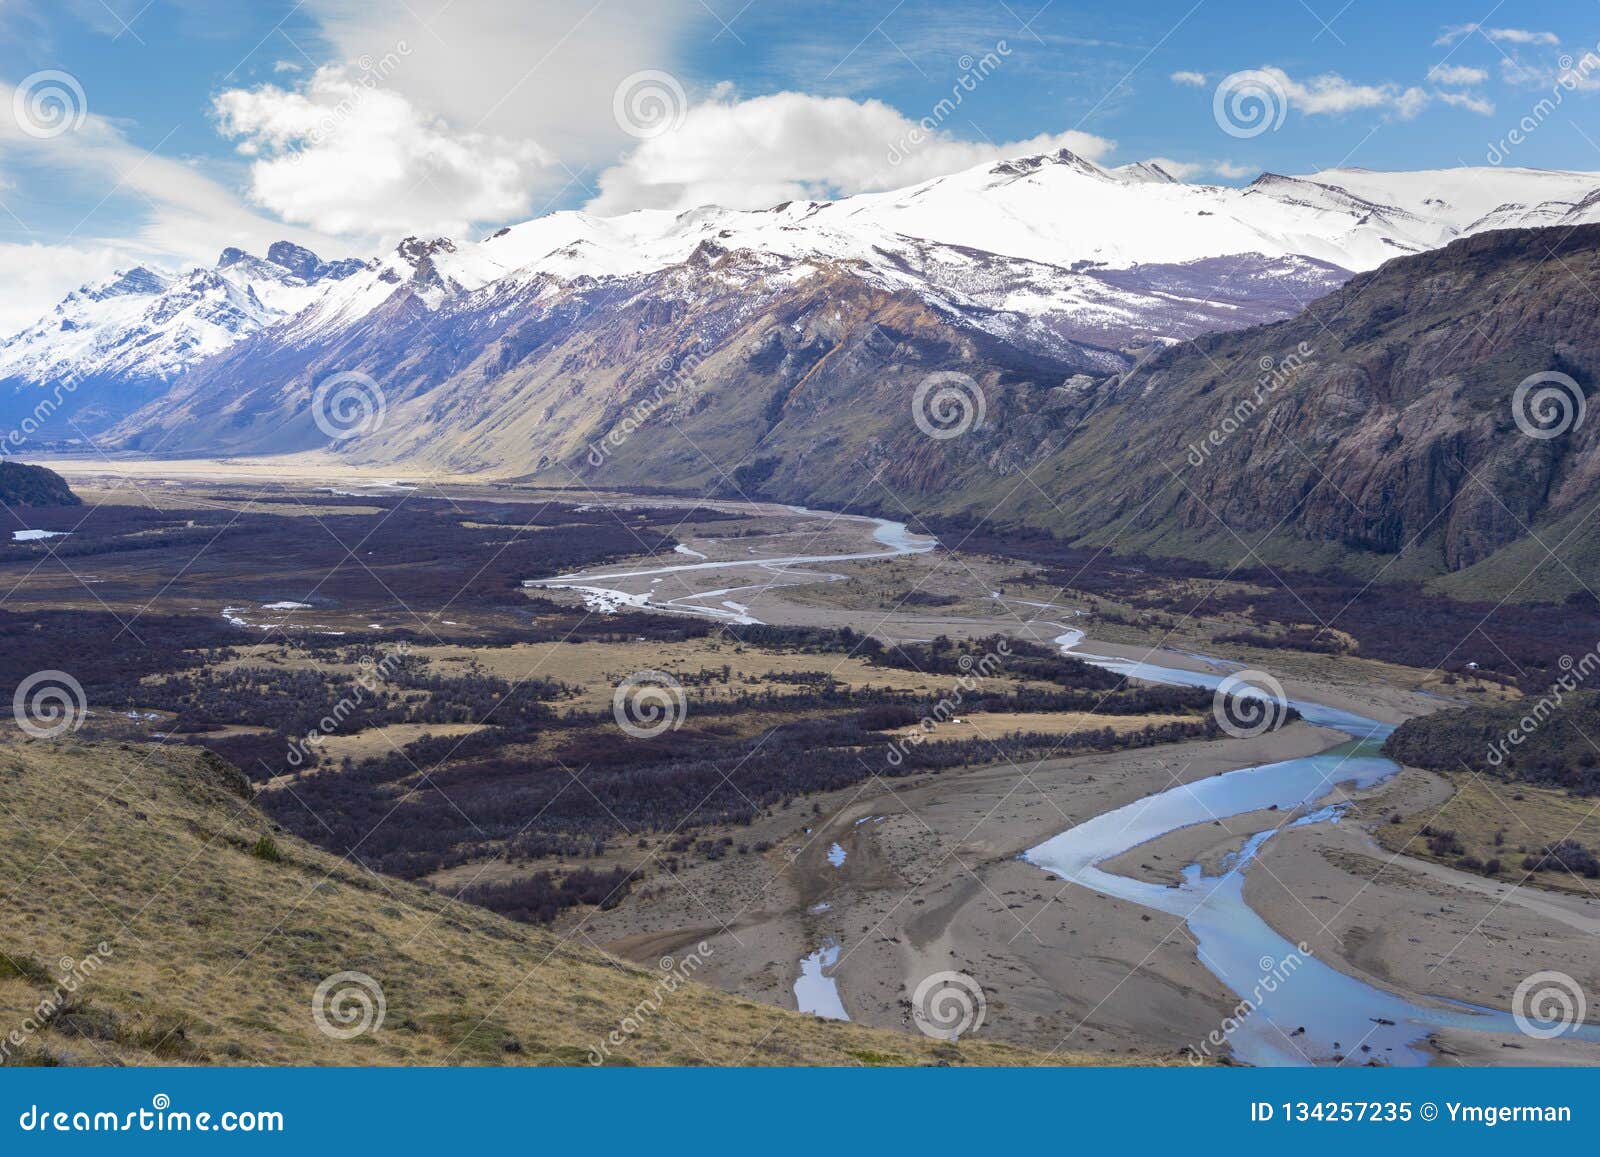 Mountains and River in Patagonia, Argentina Stock Image - Image of ...